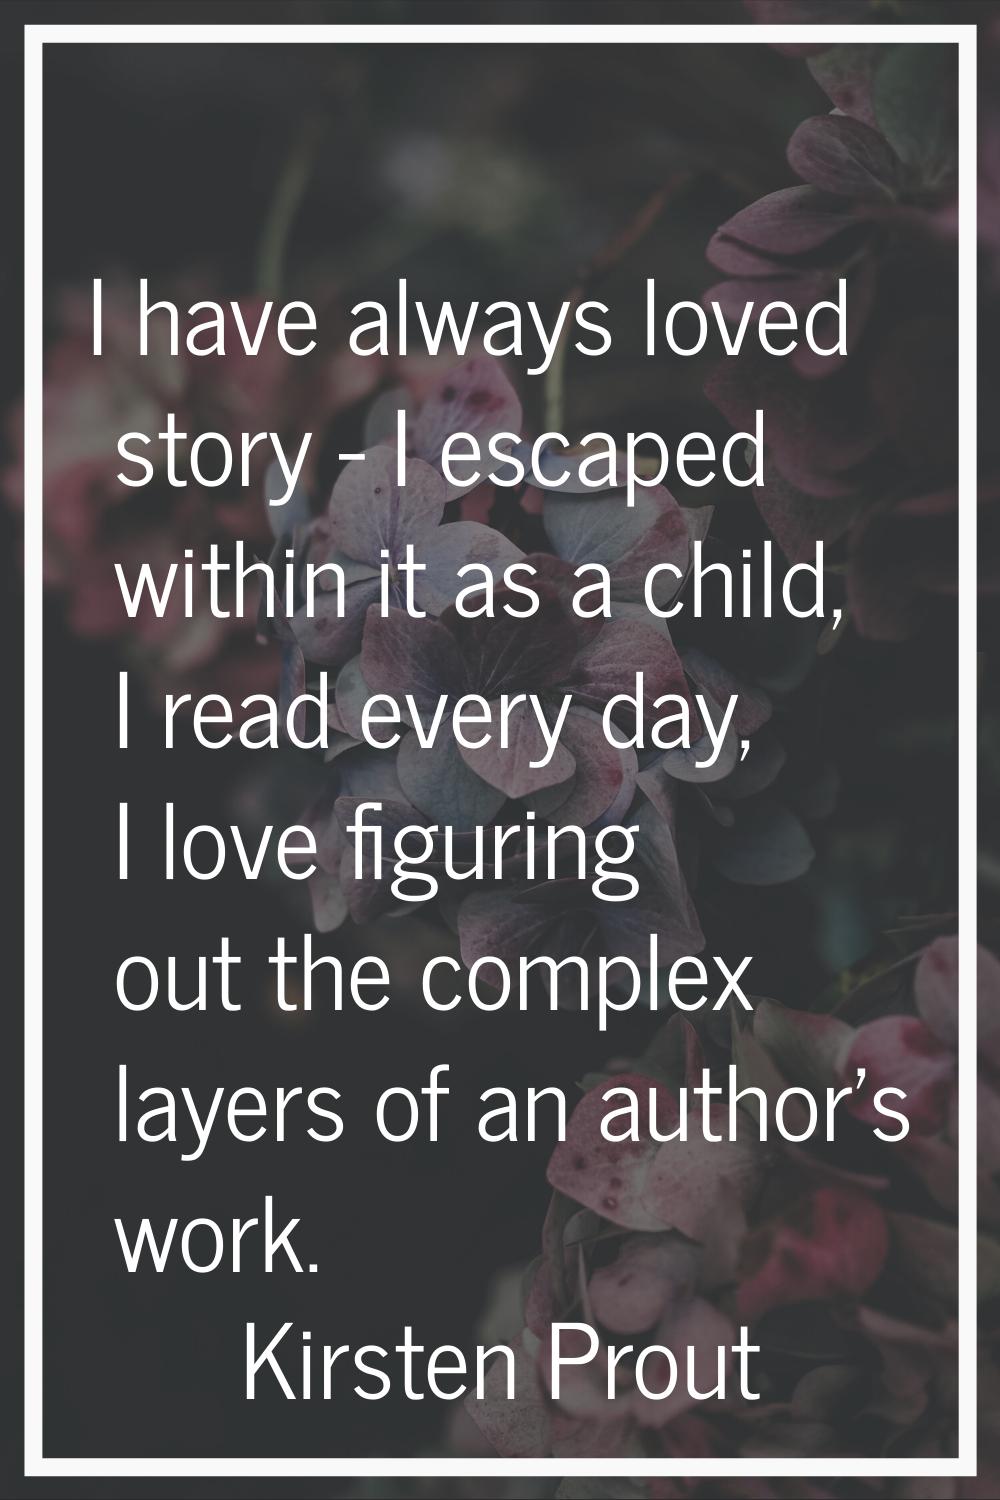 I have always loved story - I escaped within it as a child, I read every day, I love figuring out t